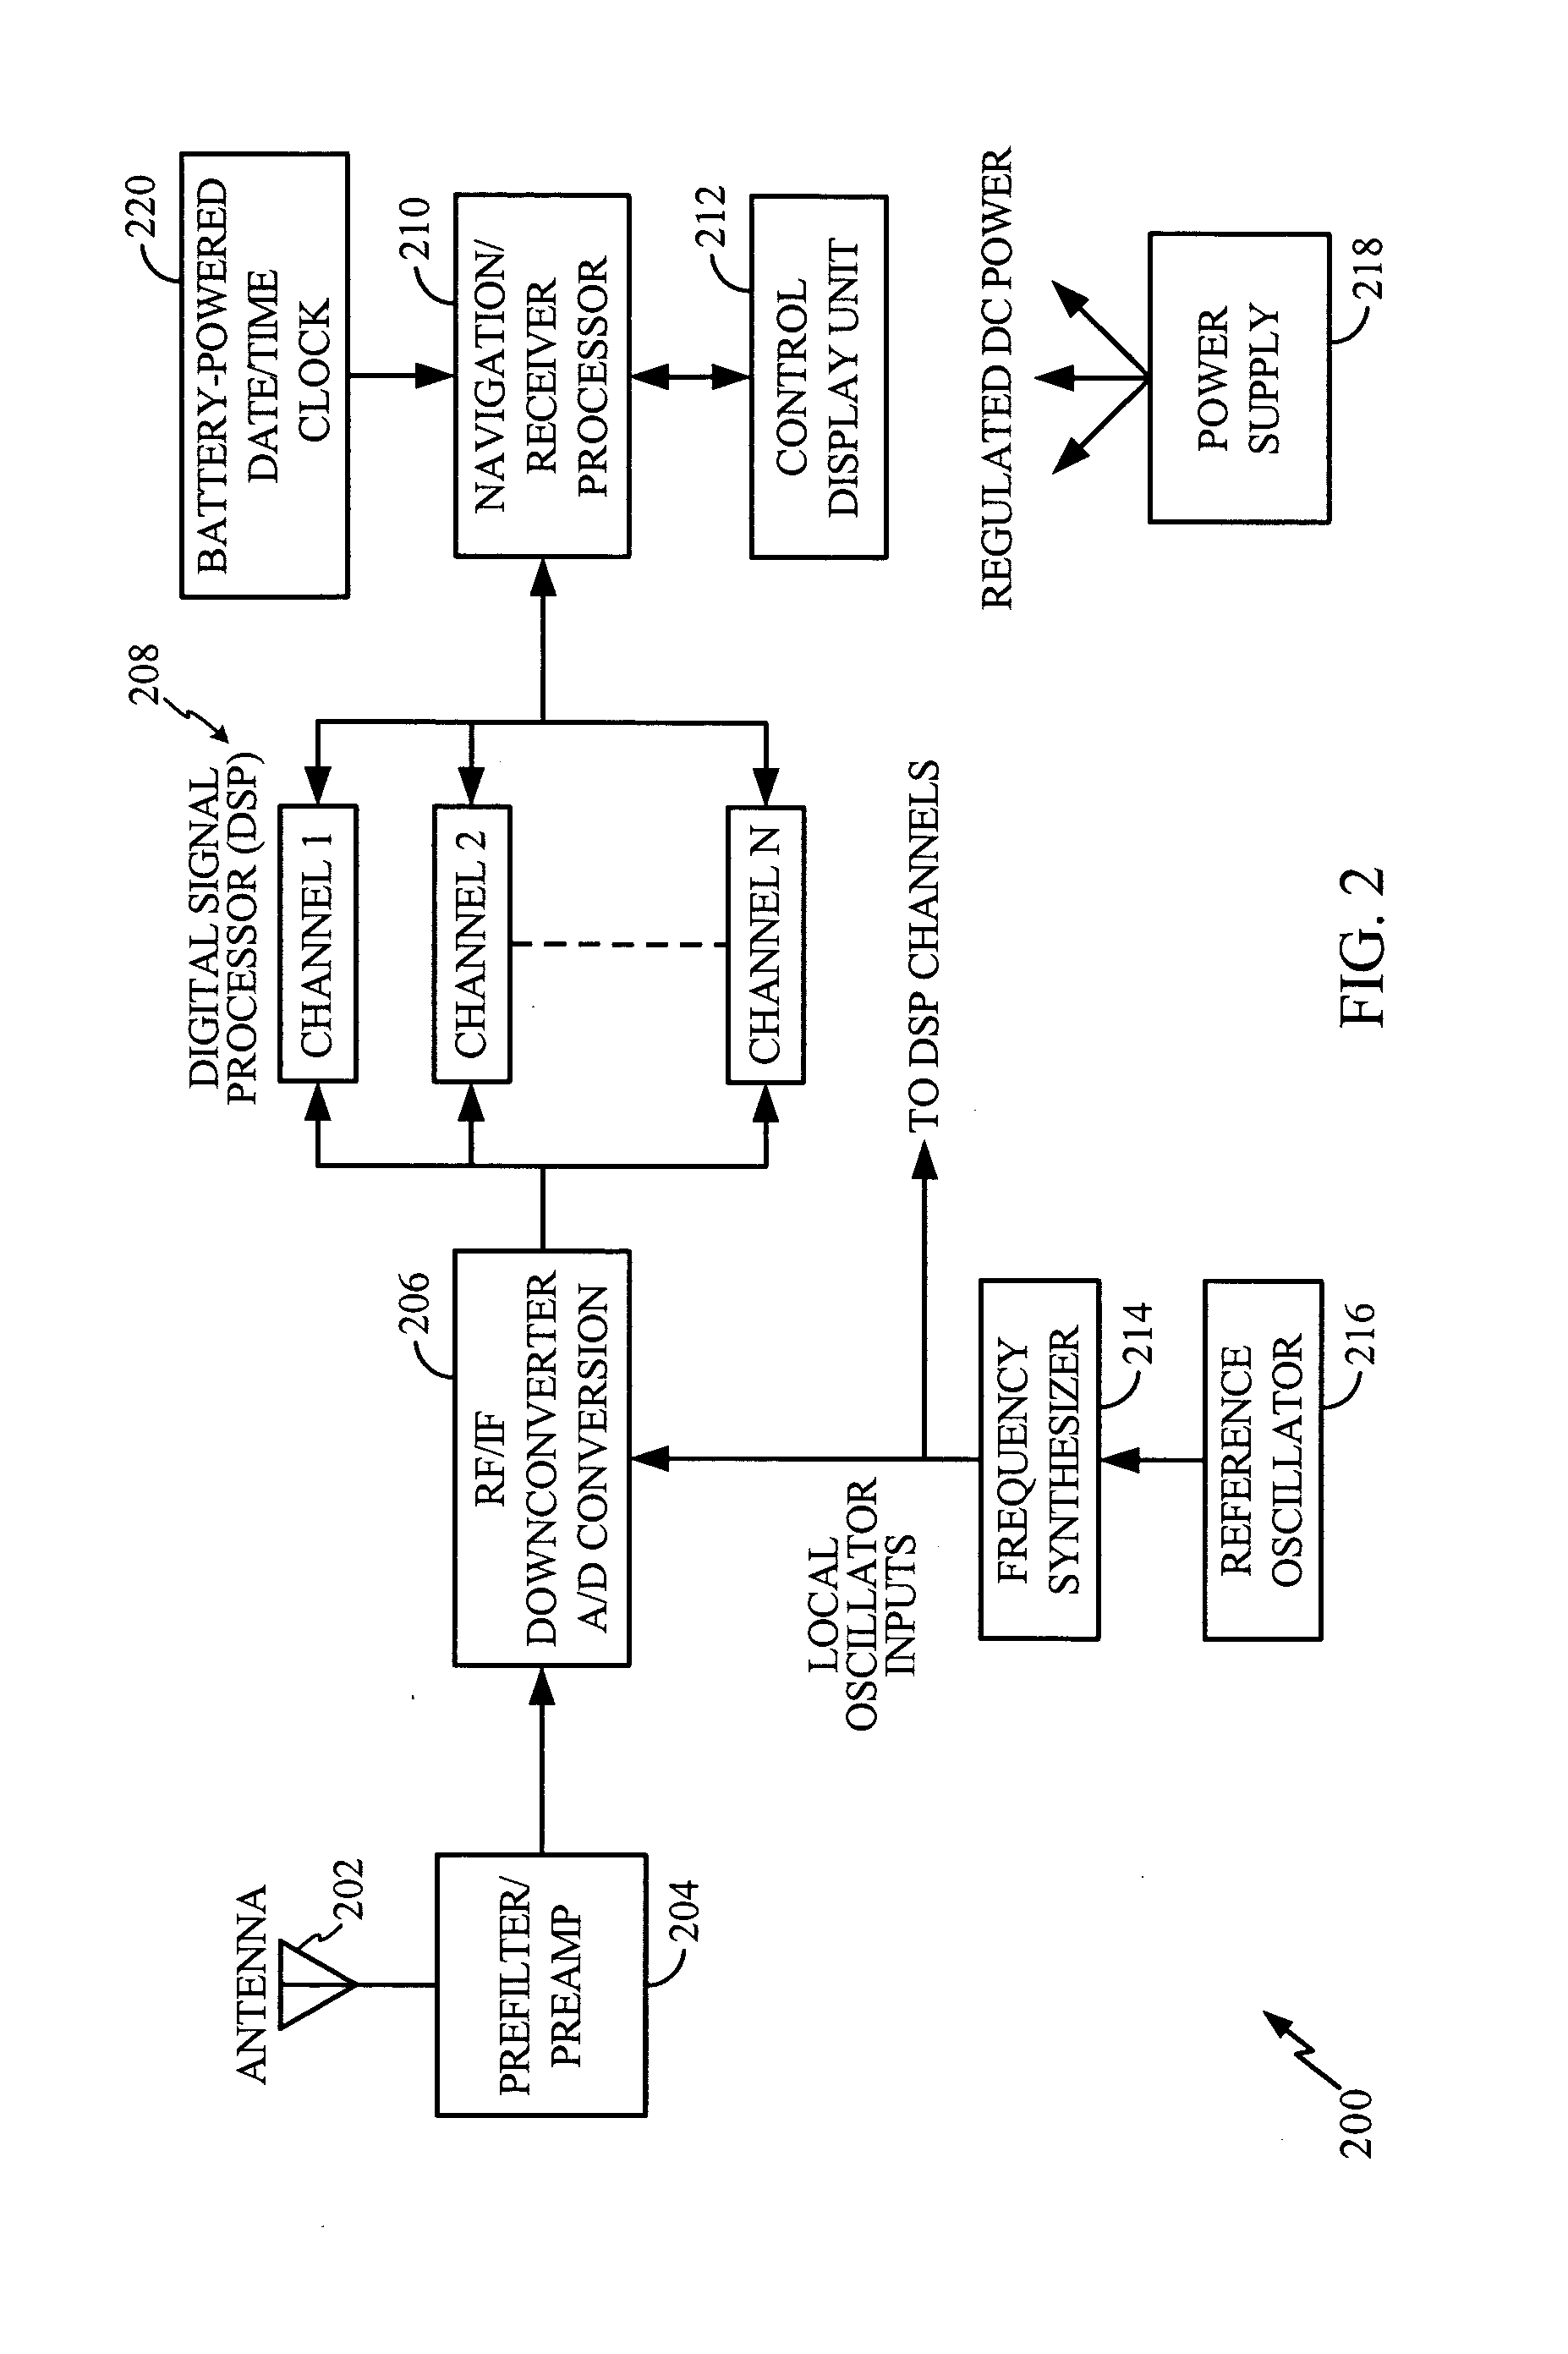 Cross-correlation mitigation method and apparatus for use in a global positioning system receiver